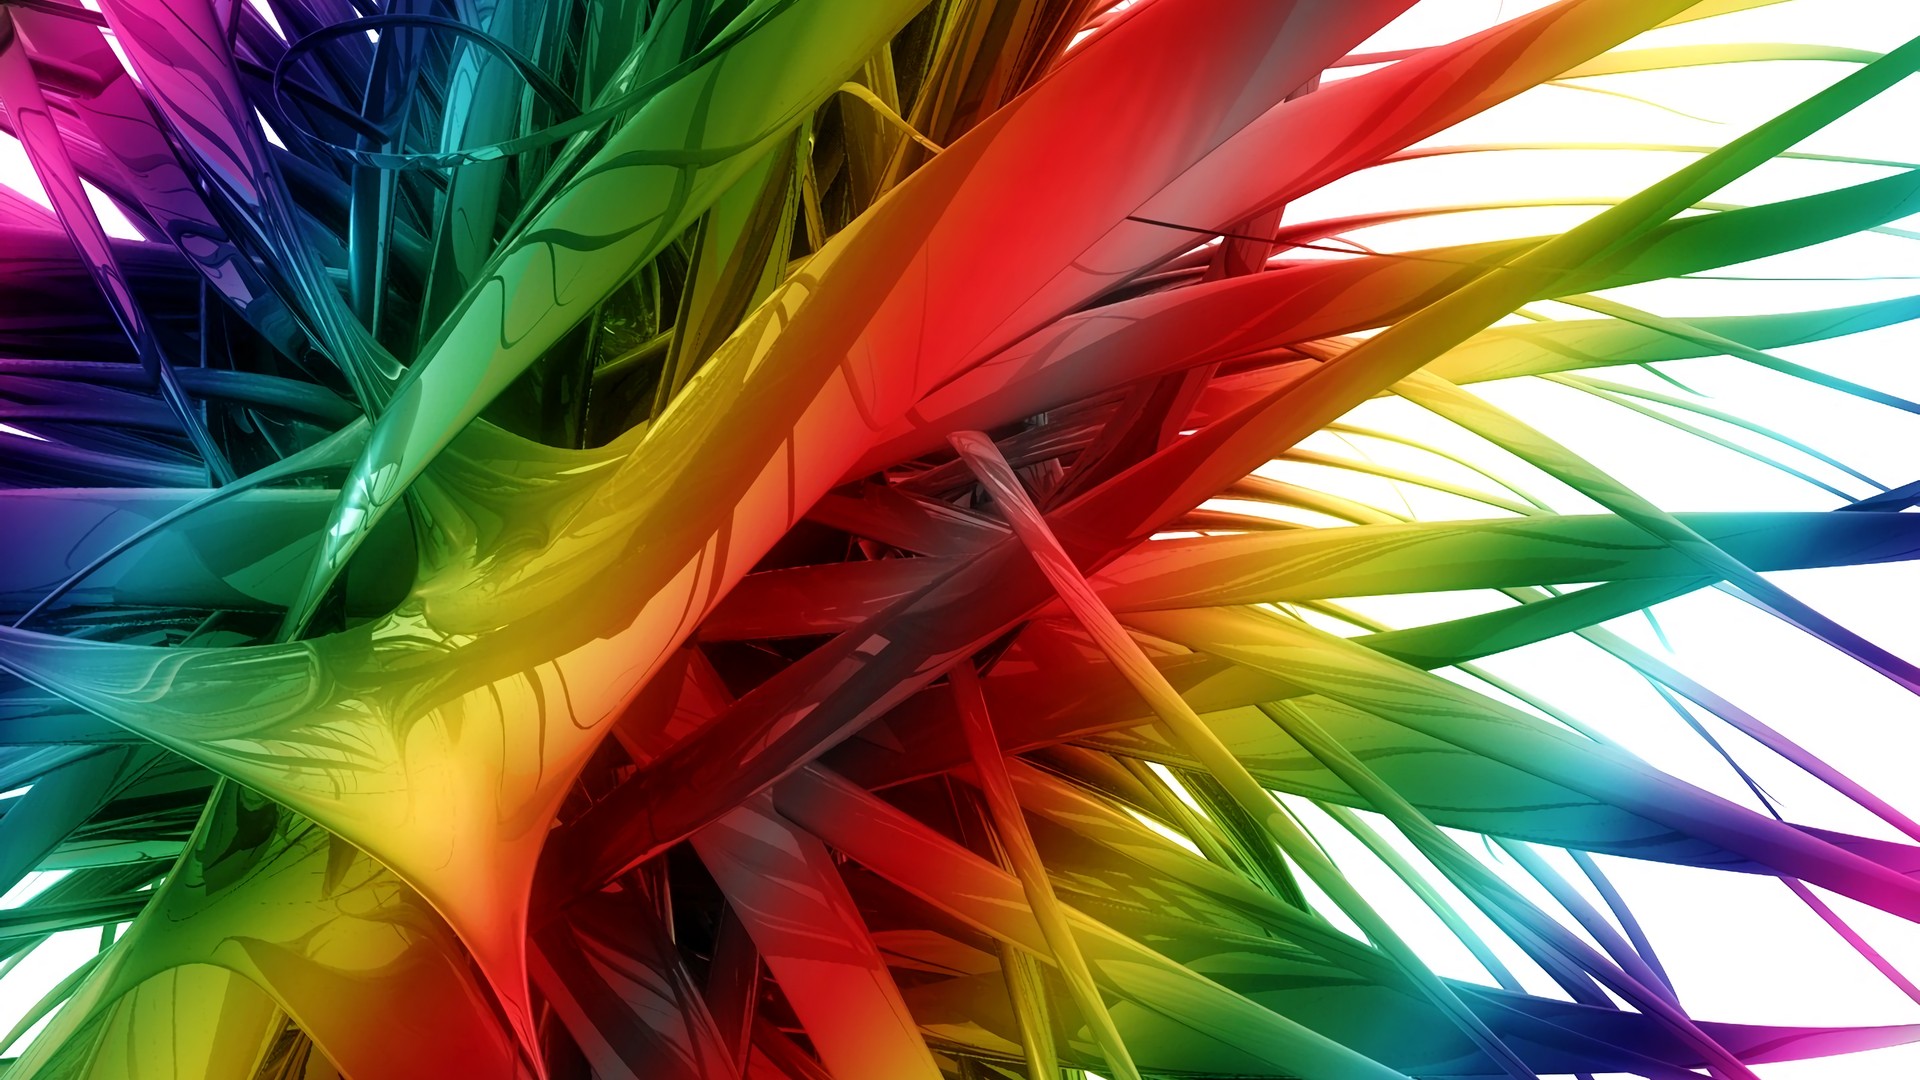 Rainbow Colors Wallpaper HD With Resolution 1920X1080 pixel. You can make this wallpaper for your Desktop Computer Backgrounds, Mac Wallpapers, Android Lock screen or iPhone Screensavers